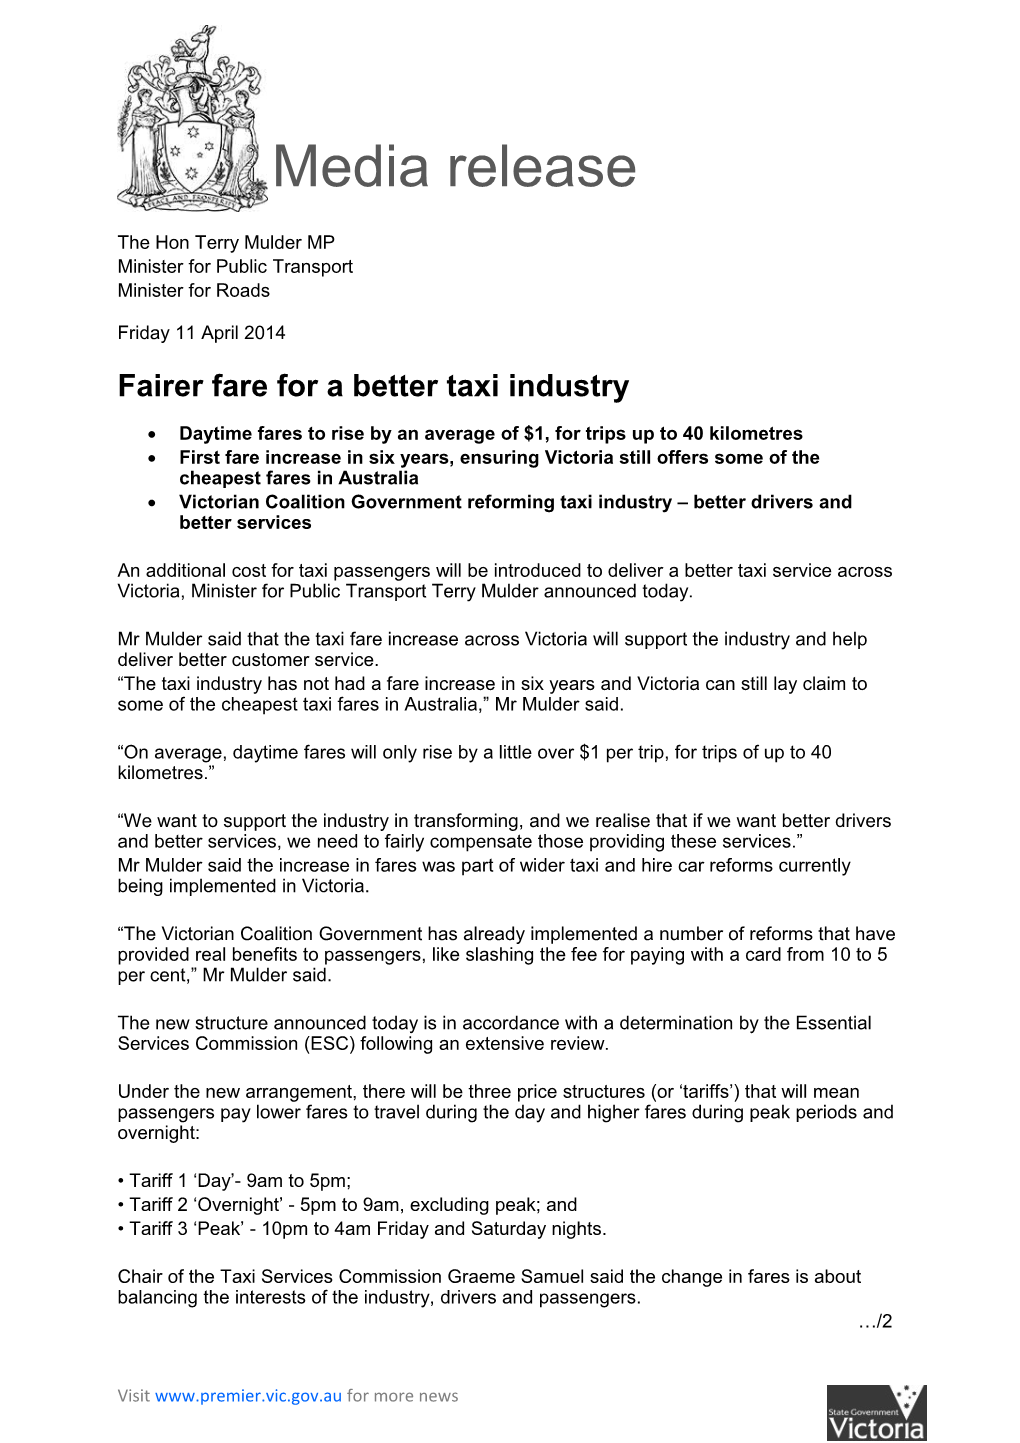 Fairer Fare for a Better Taxi Industry